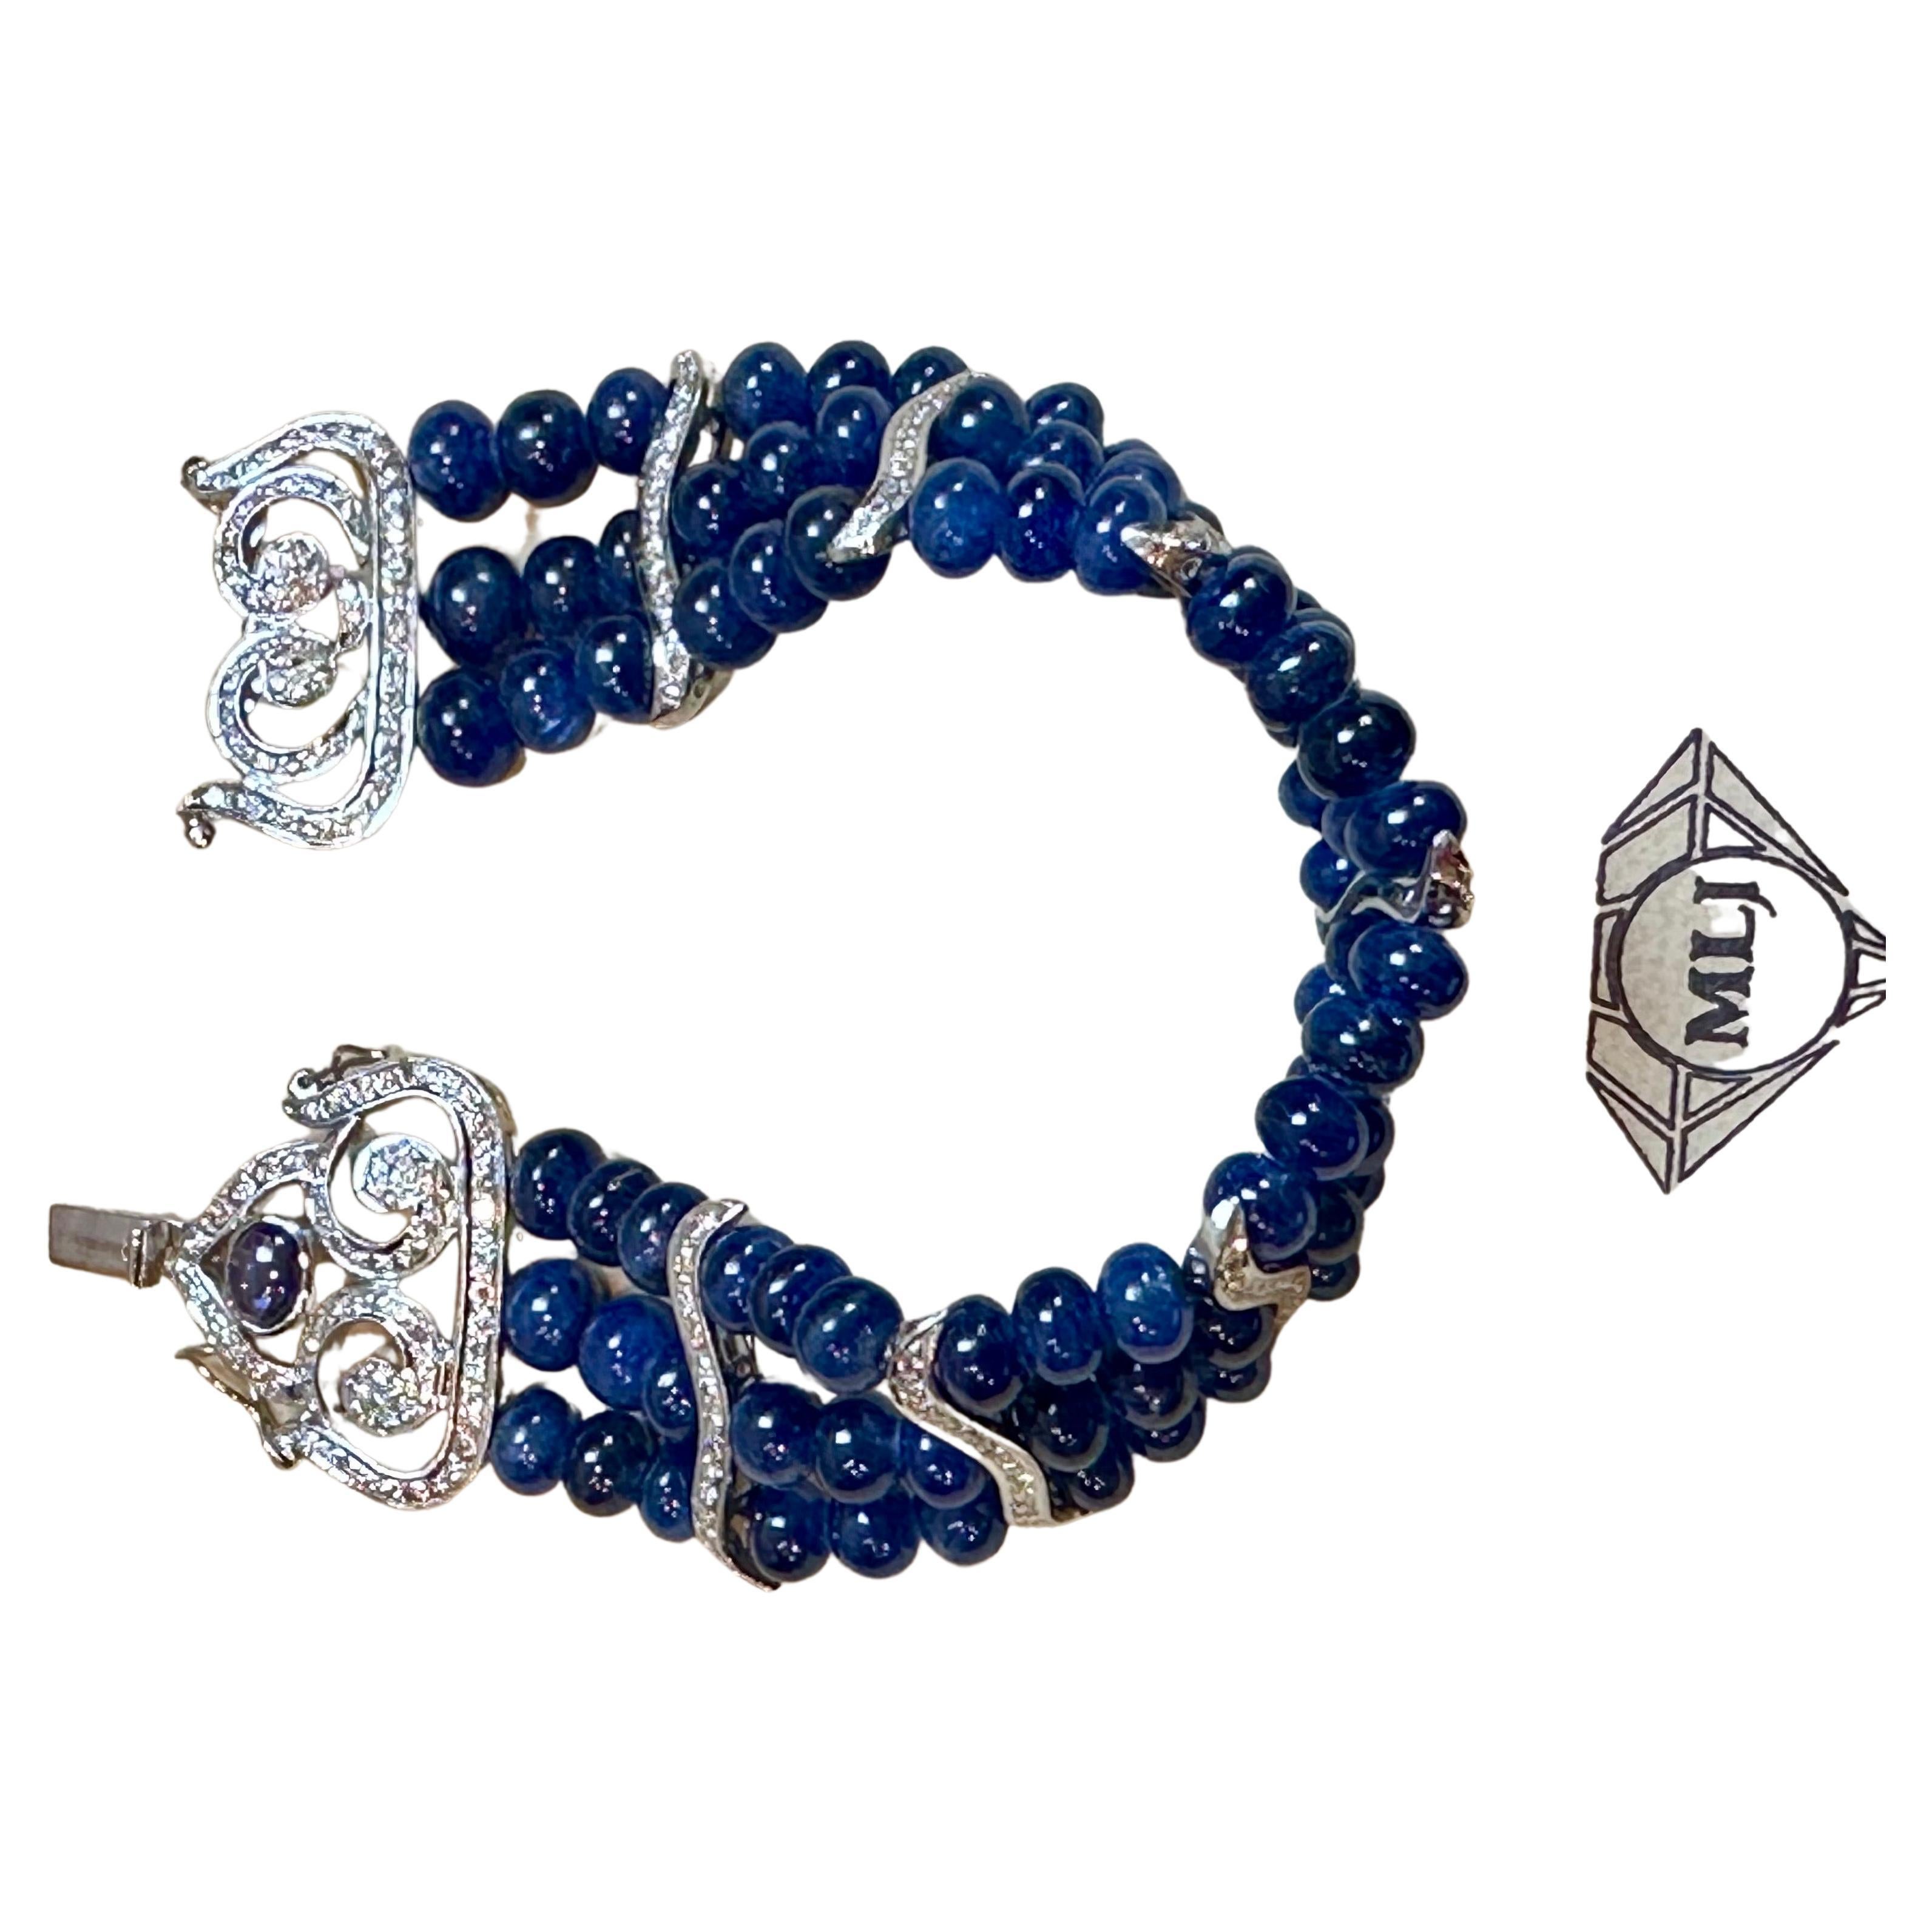 GIA Certified Burma No Heat Natural Blue Sapphire Bead & Diamond Bracelet , 18 Karat White Gold 
This exceptionally Beautiful , High Quality  bracelet has 225 Ct of GIA certified Burma Sapphire Beads with no heat Treatment

Total weight of Sapphire